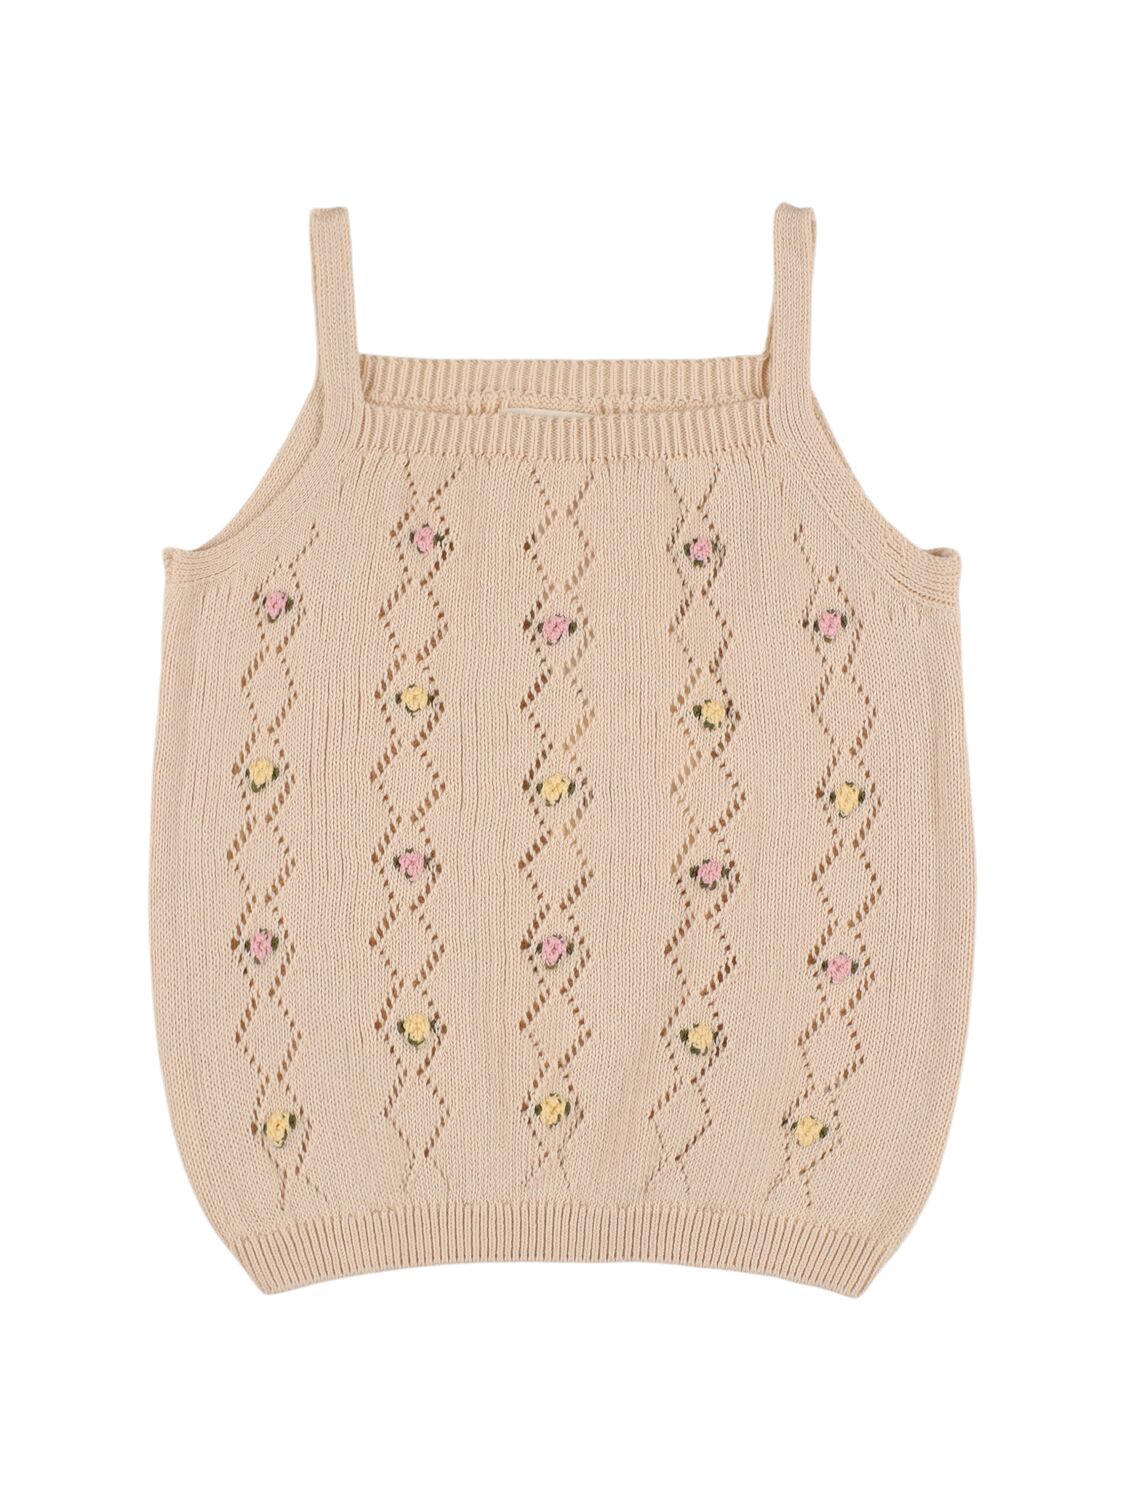 The New Society Kids' Organic Cotton Knit Top In Multicolor